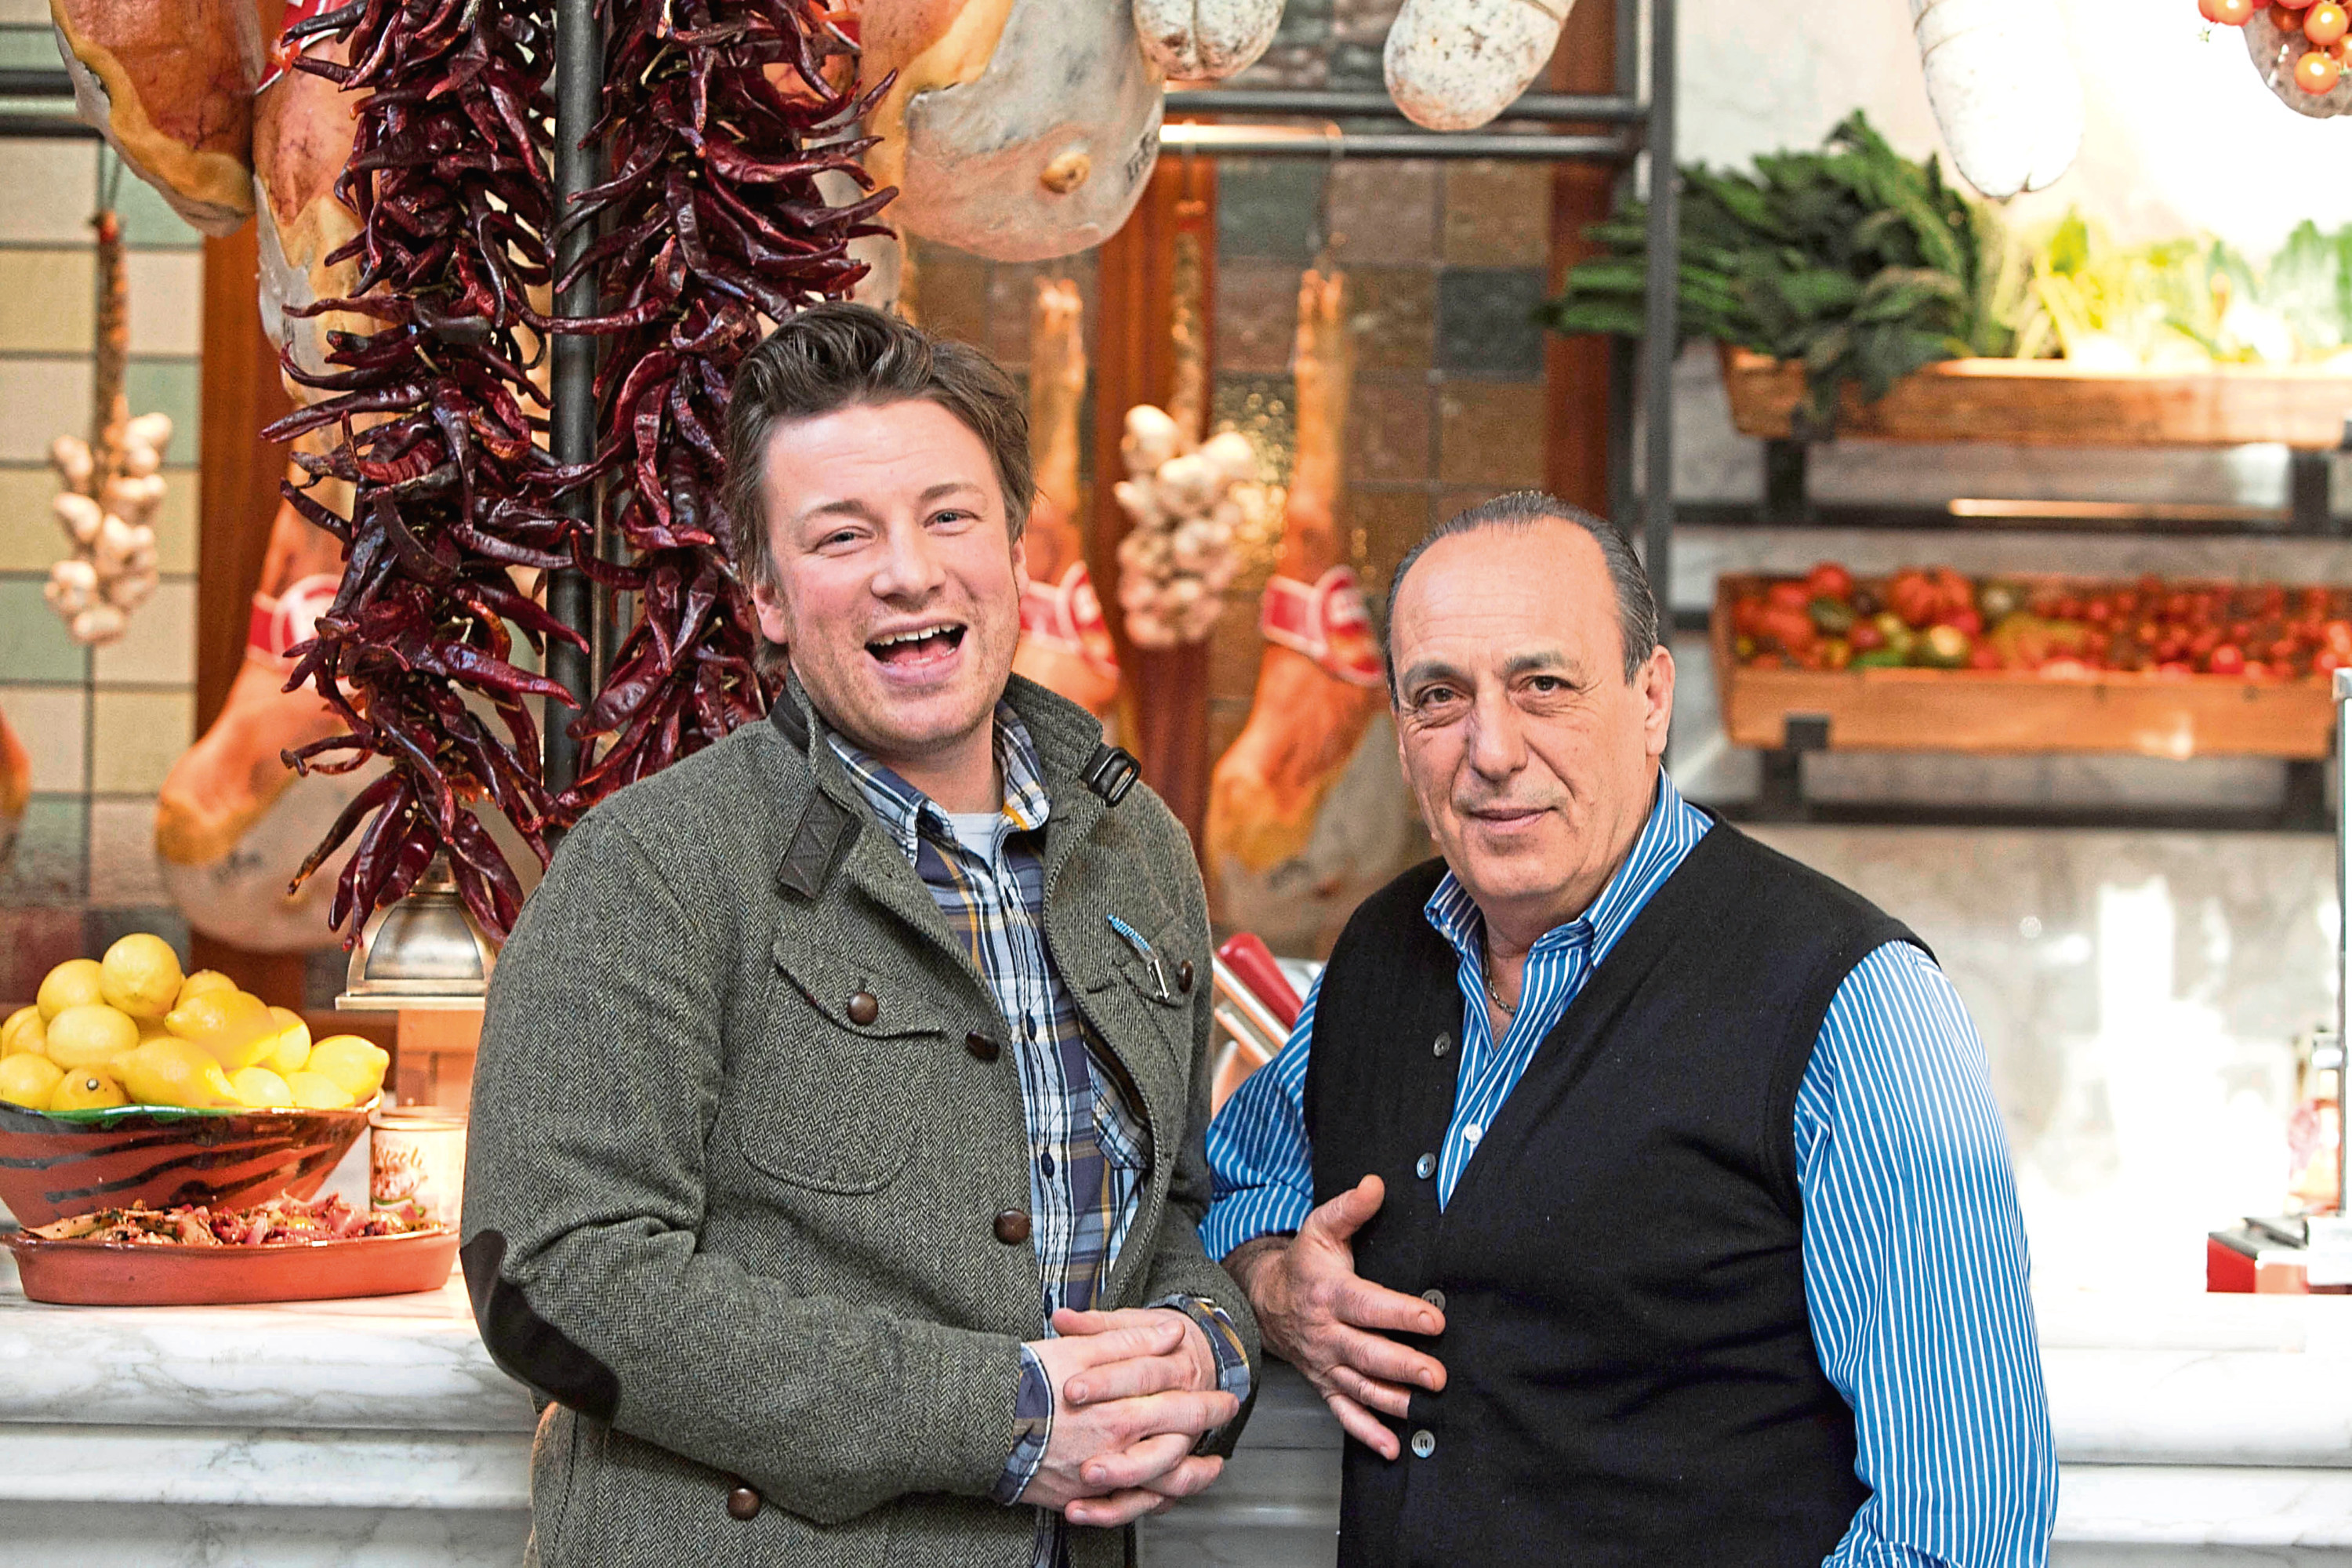 Gennaro Contaldo, right, with fellow chef and friend Jamie Oliver